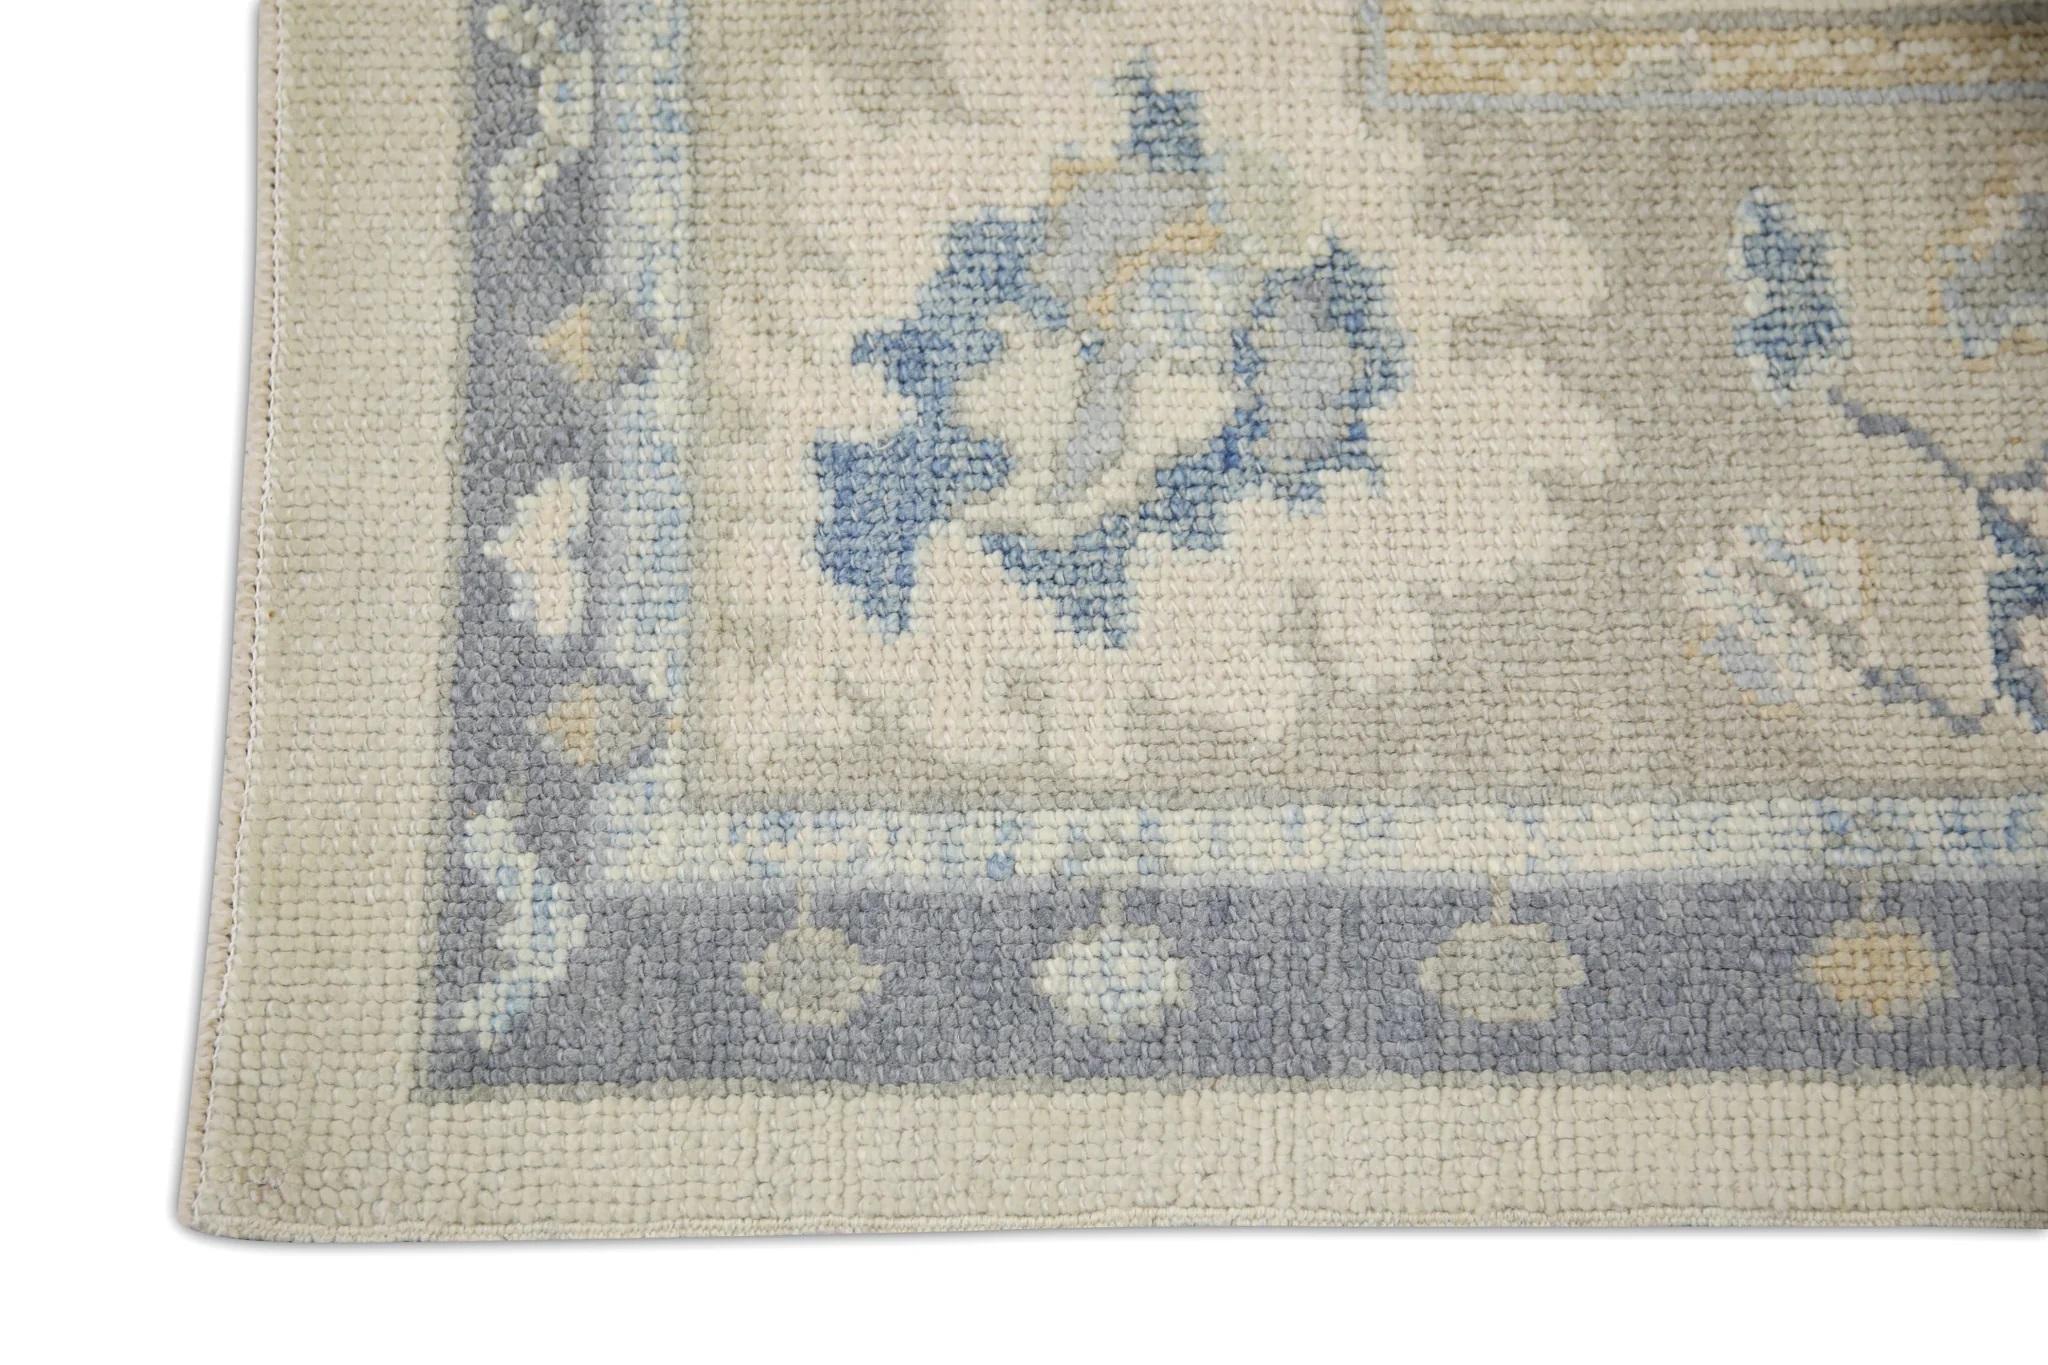 Taupe and Blue Floral Handwoven Wool Turkish Oushak Rug 6' x 8'9